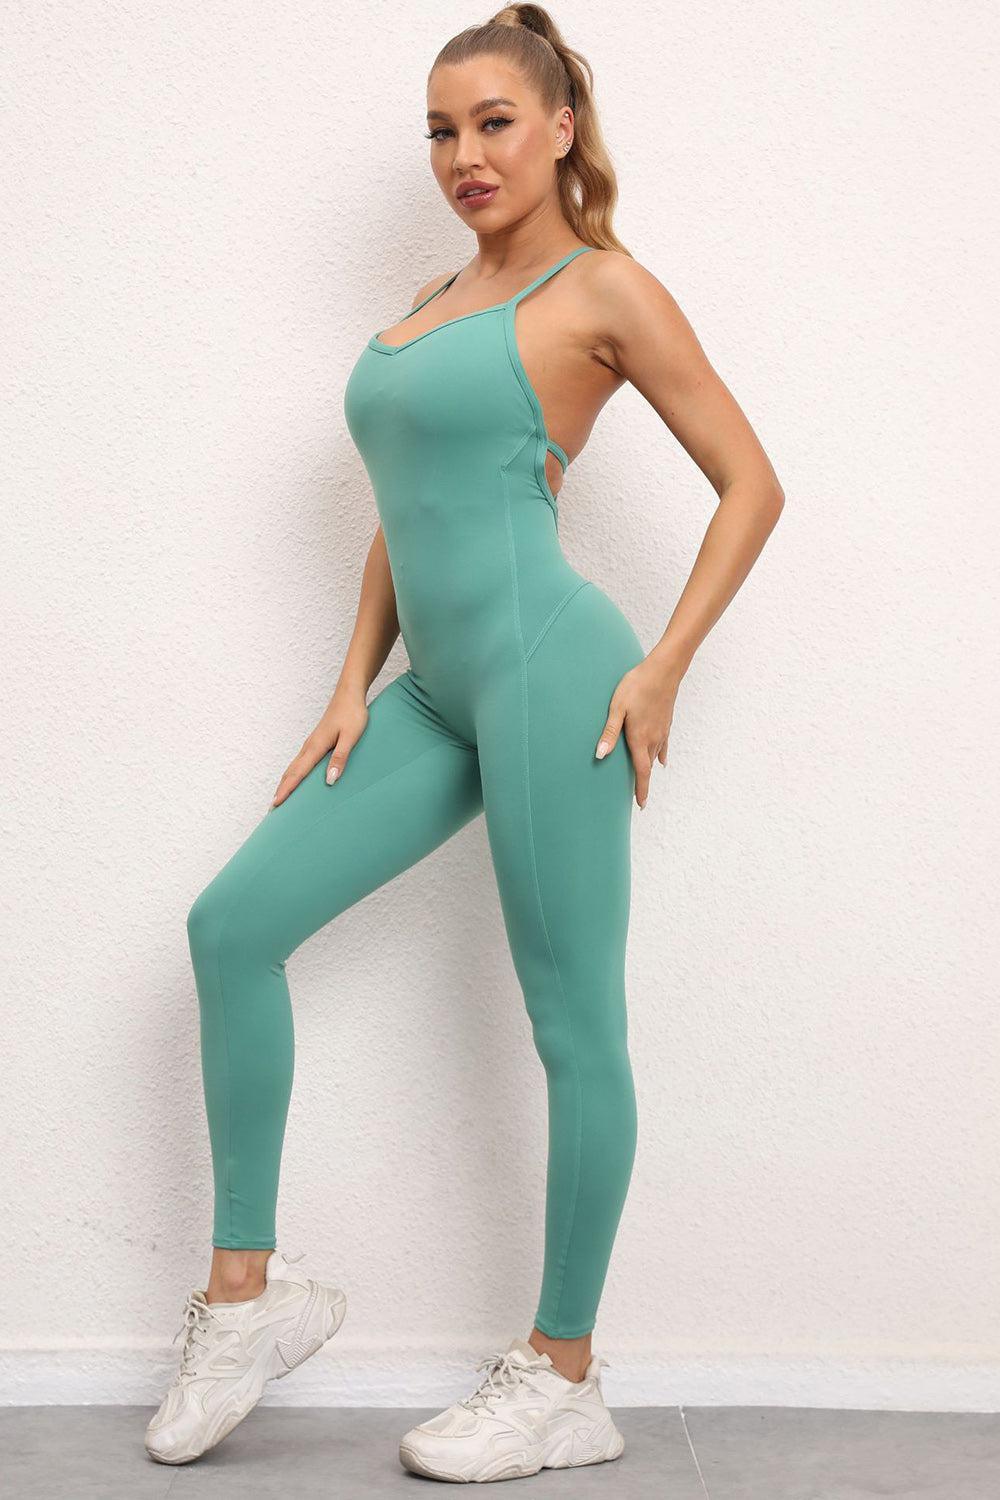 a woman in a green bodysuit posing for a picture